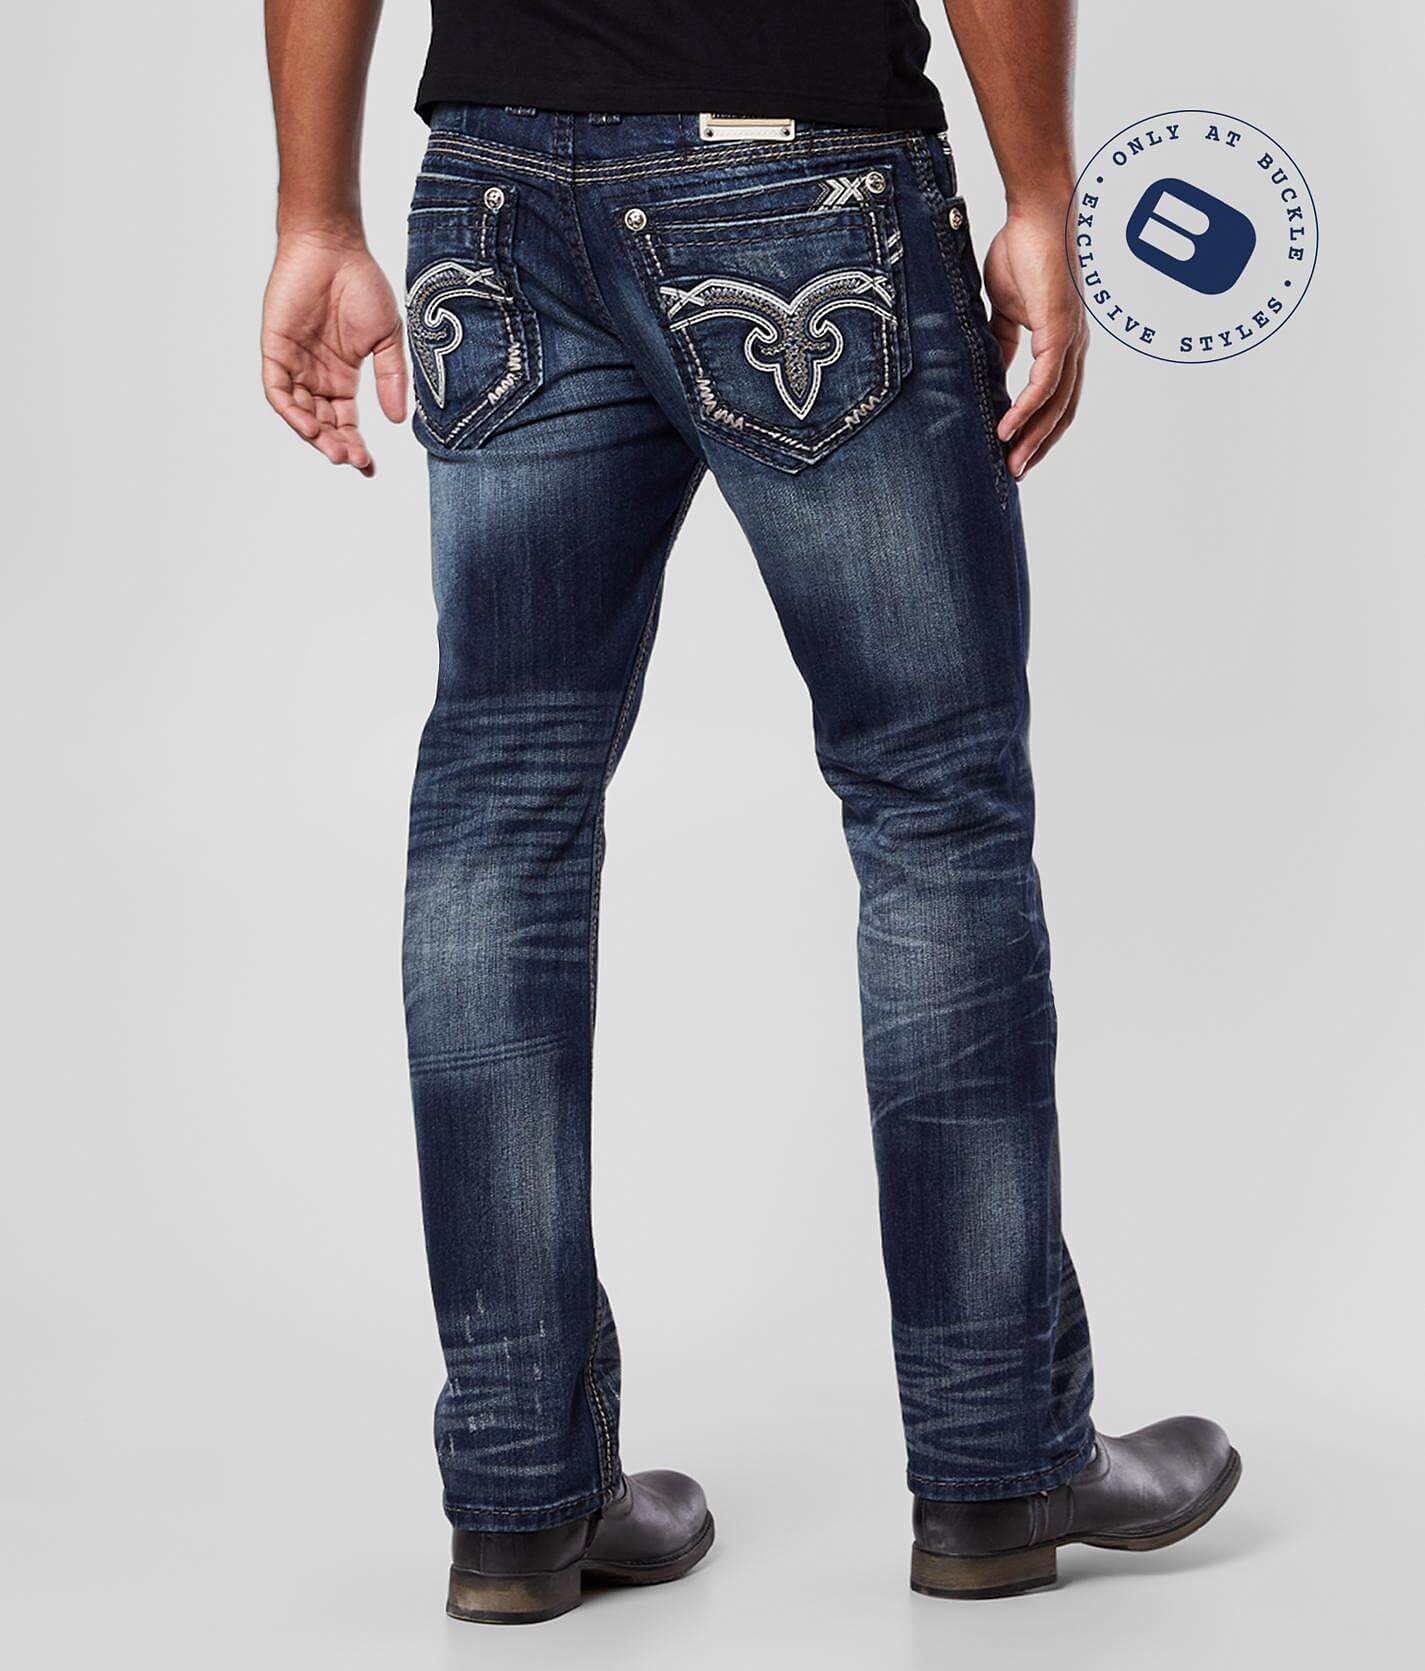 rock and revival mens jeans